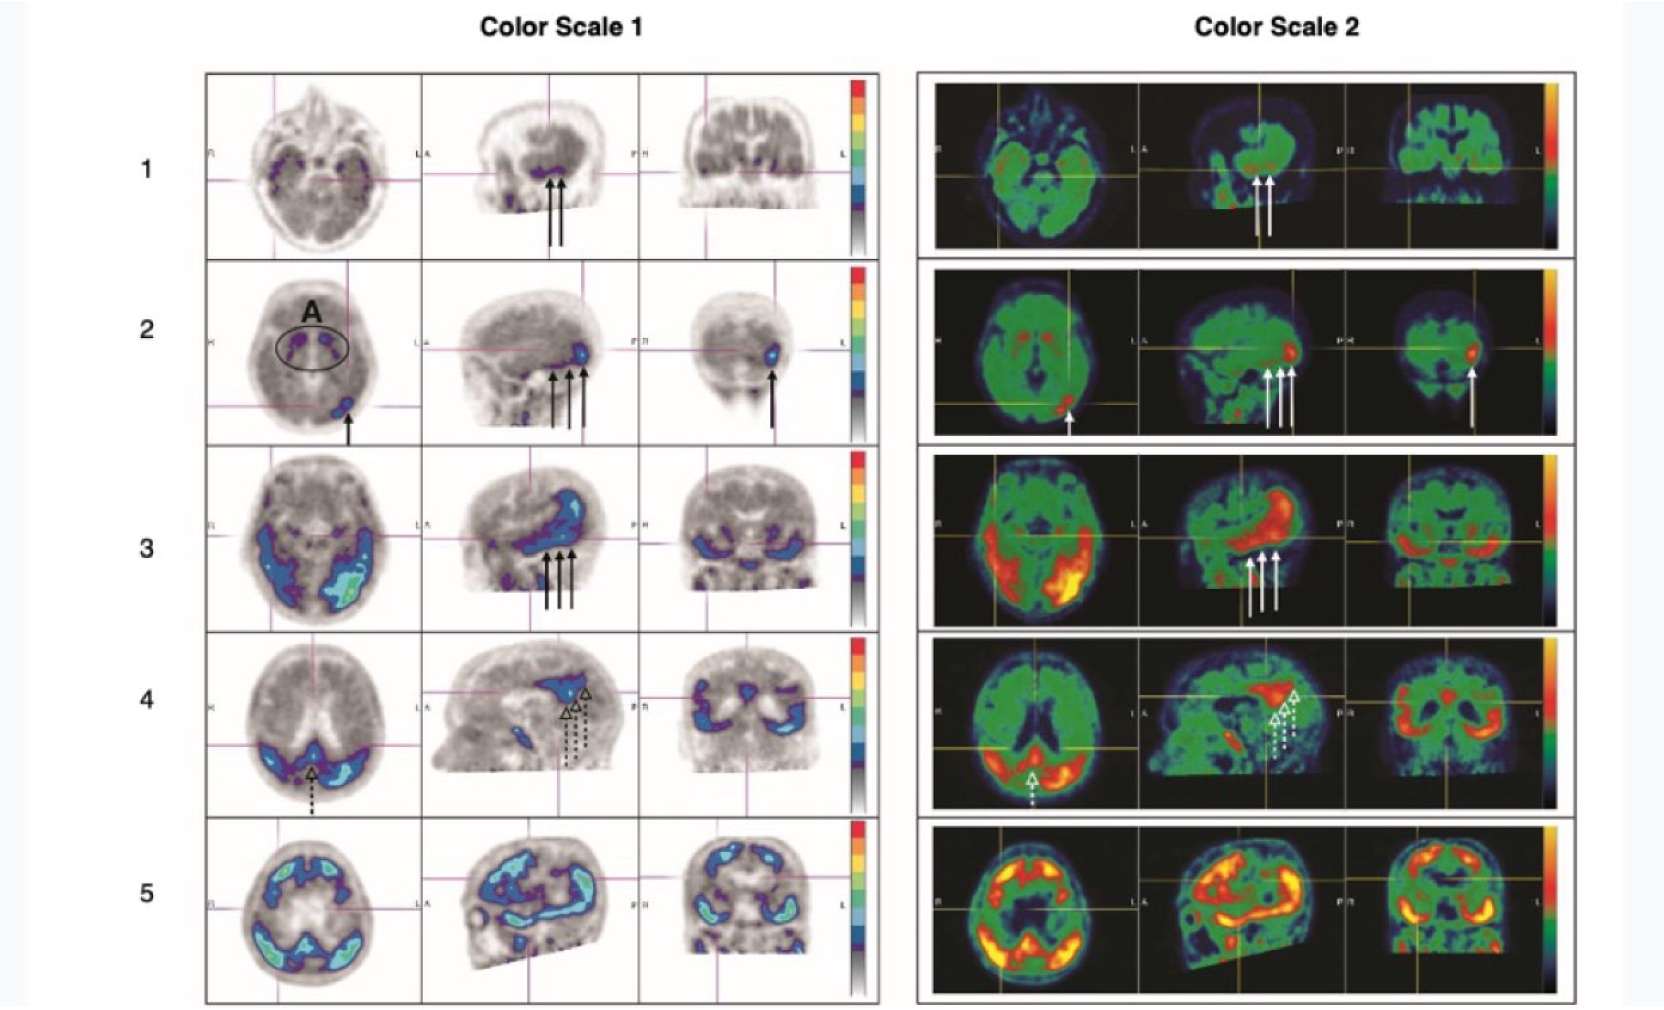 Two positive brain scans––a black and white scan and a colorful scan